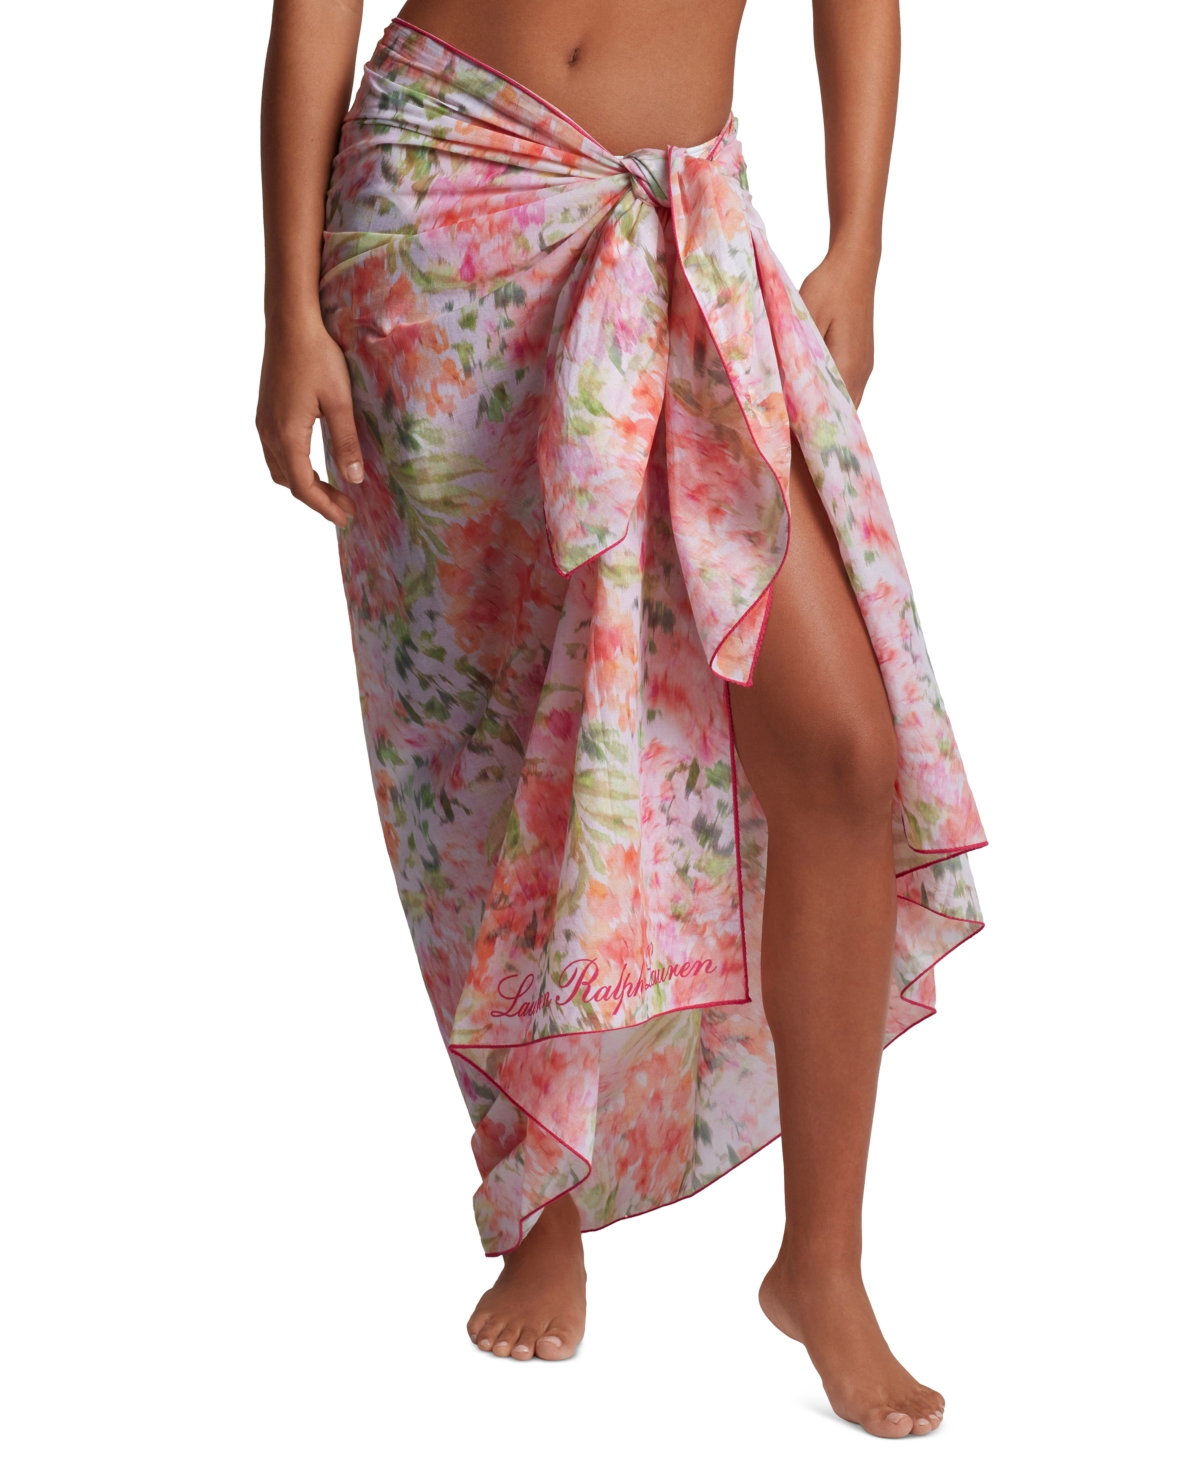 Women's Floral-Print Pareo Cotton Cover-Up - Multi